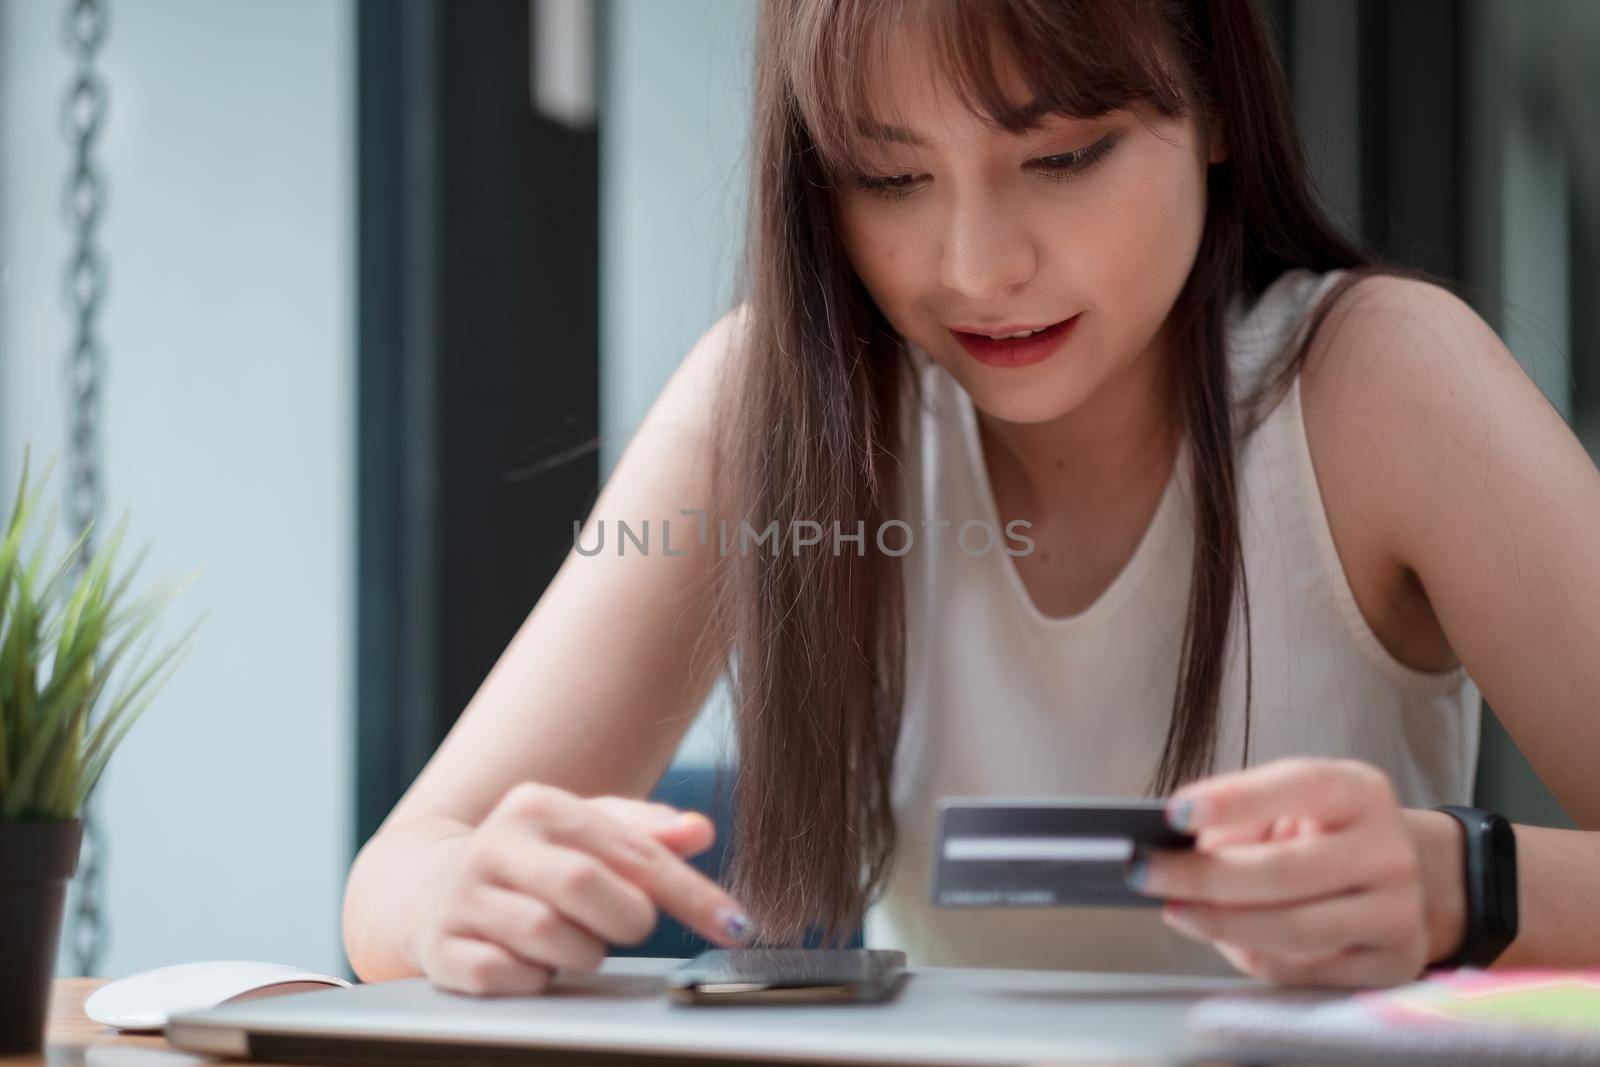 Portrait of young Asian woman smiling and holding a credit card and using a smartphone to shop online at home. online payment concept.